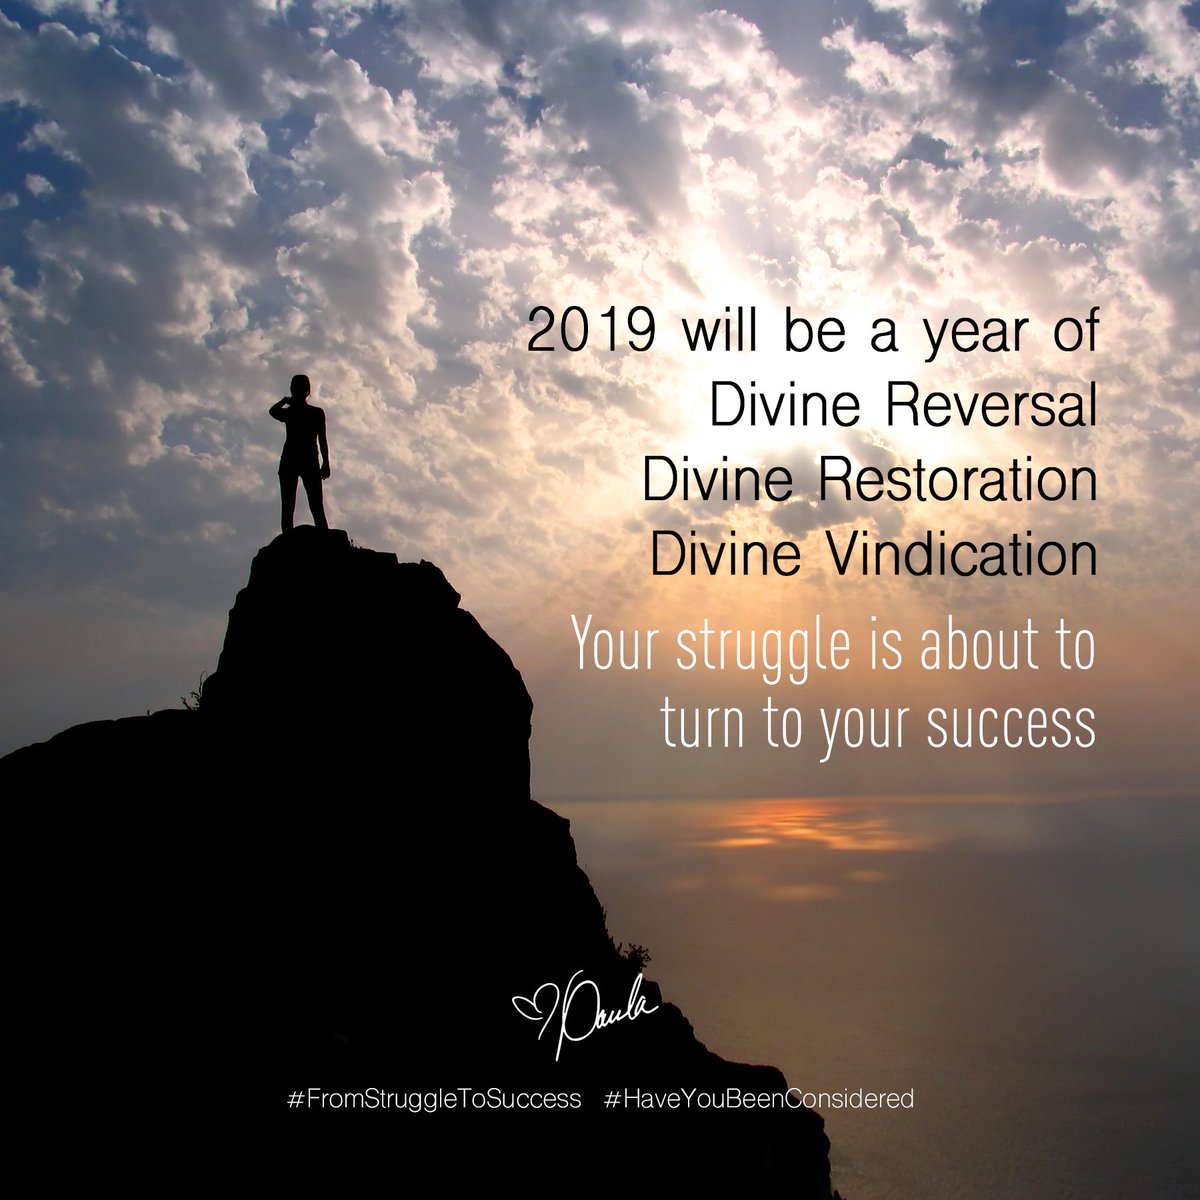 2019 will be a year of Divine Reversal, Divine Restoration and Divine Vindication… Your struggle is about to turn to your success!! Your latter is going to be greater than your beginning- GET READY!!

#FromStruggleToSuccess #HaveYouBeenConsidered